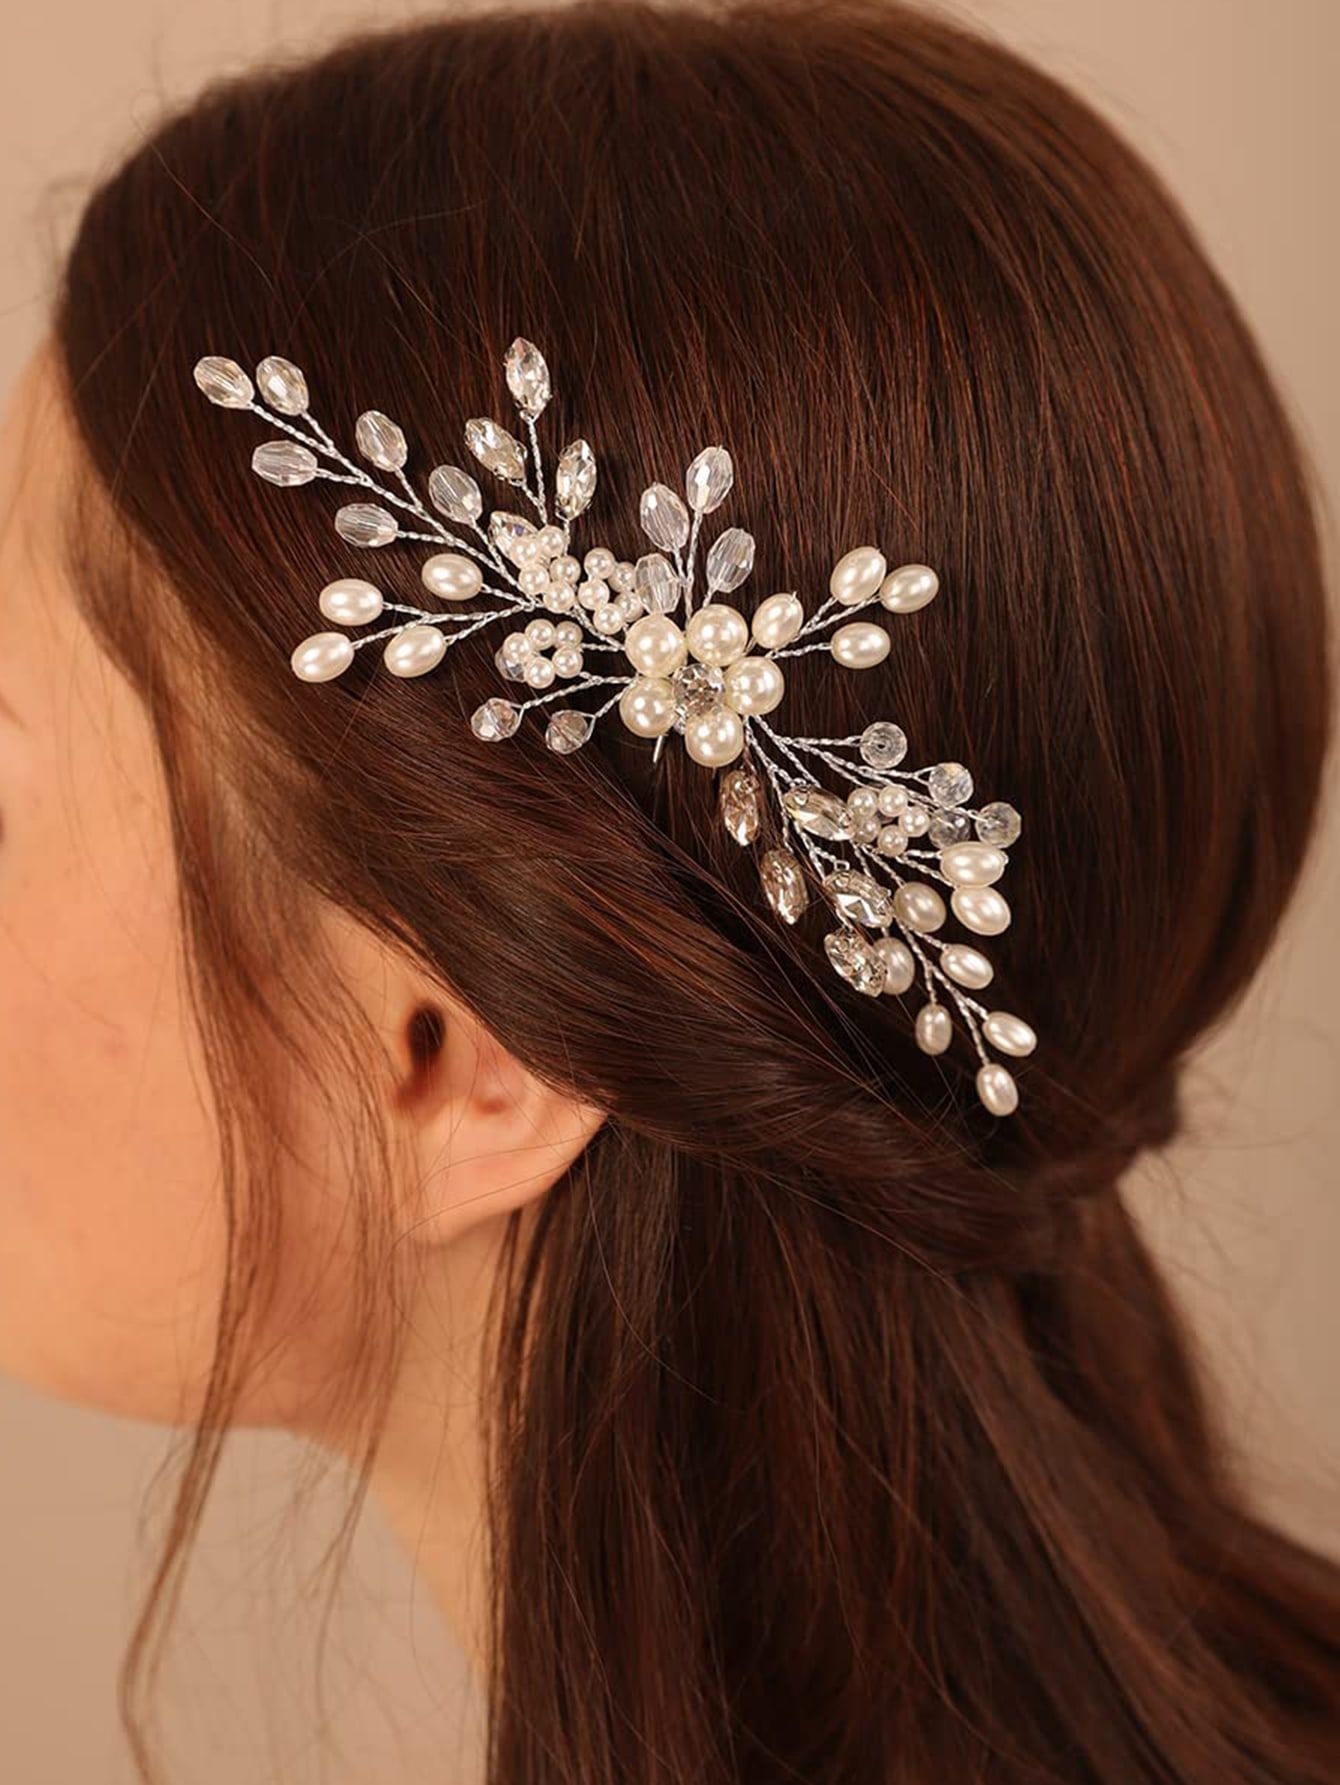 Hair up with beautiful hair brooch